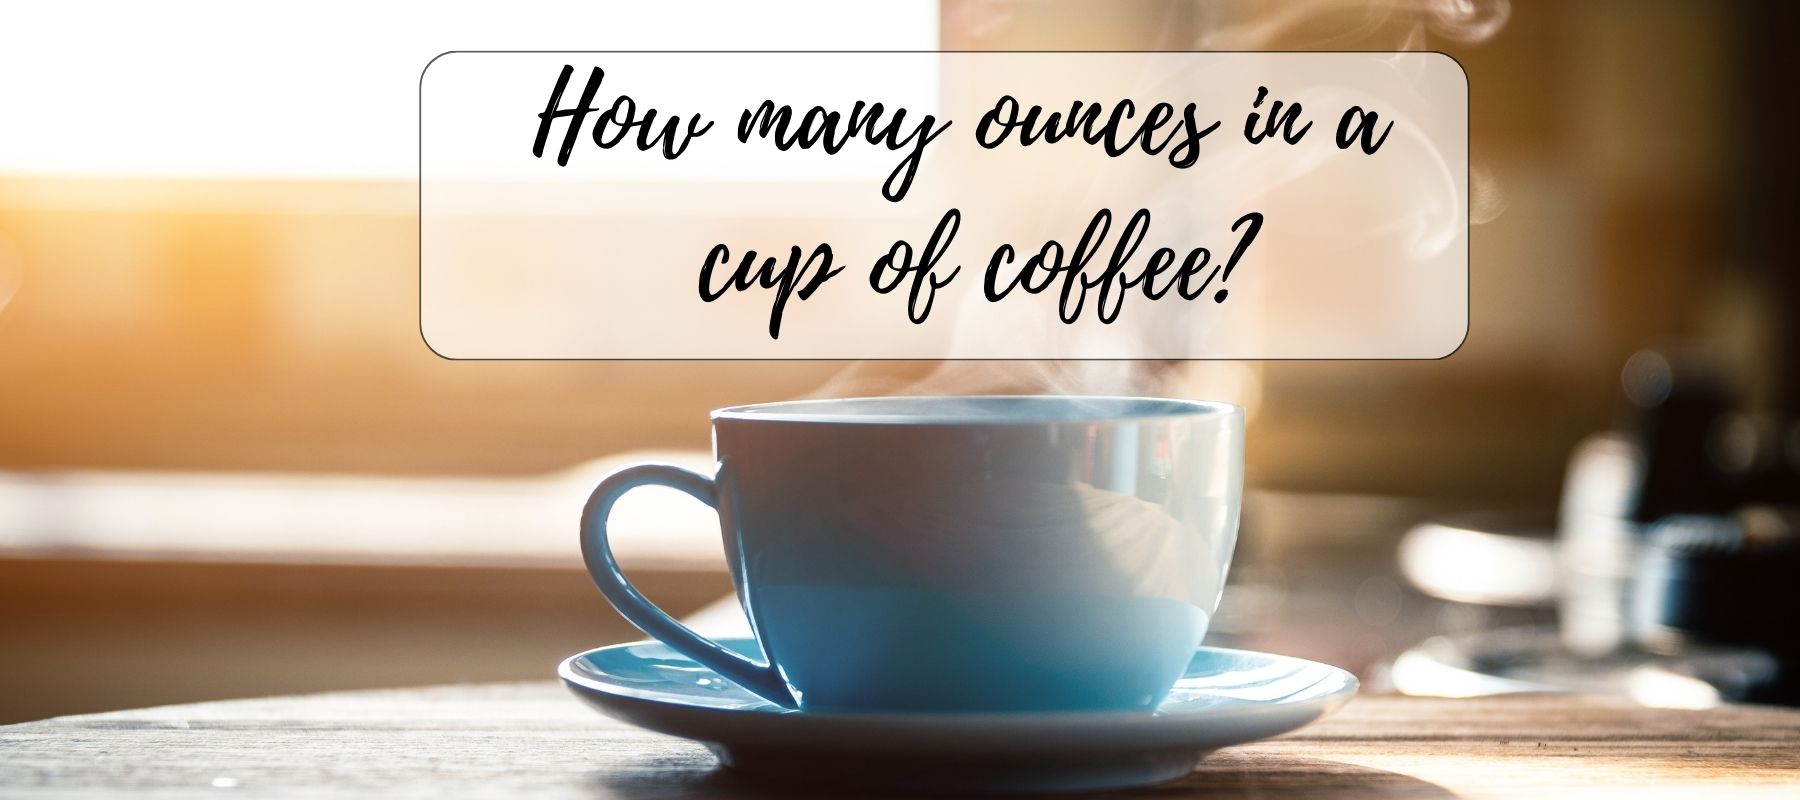 How-many-ounces-in-a-cup-of-coffee?